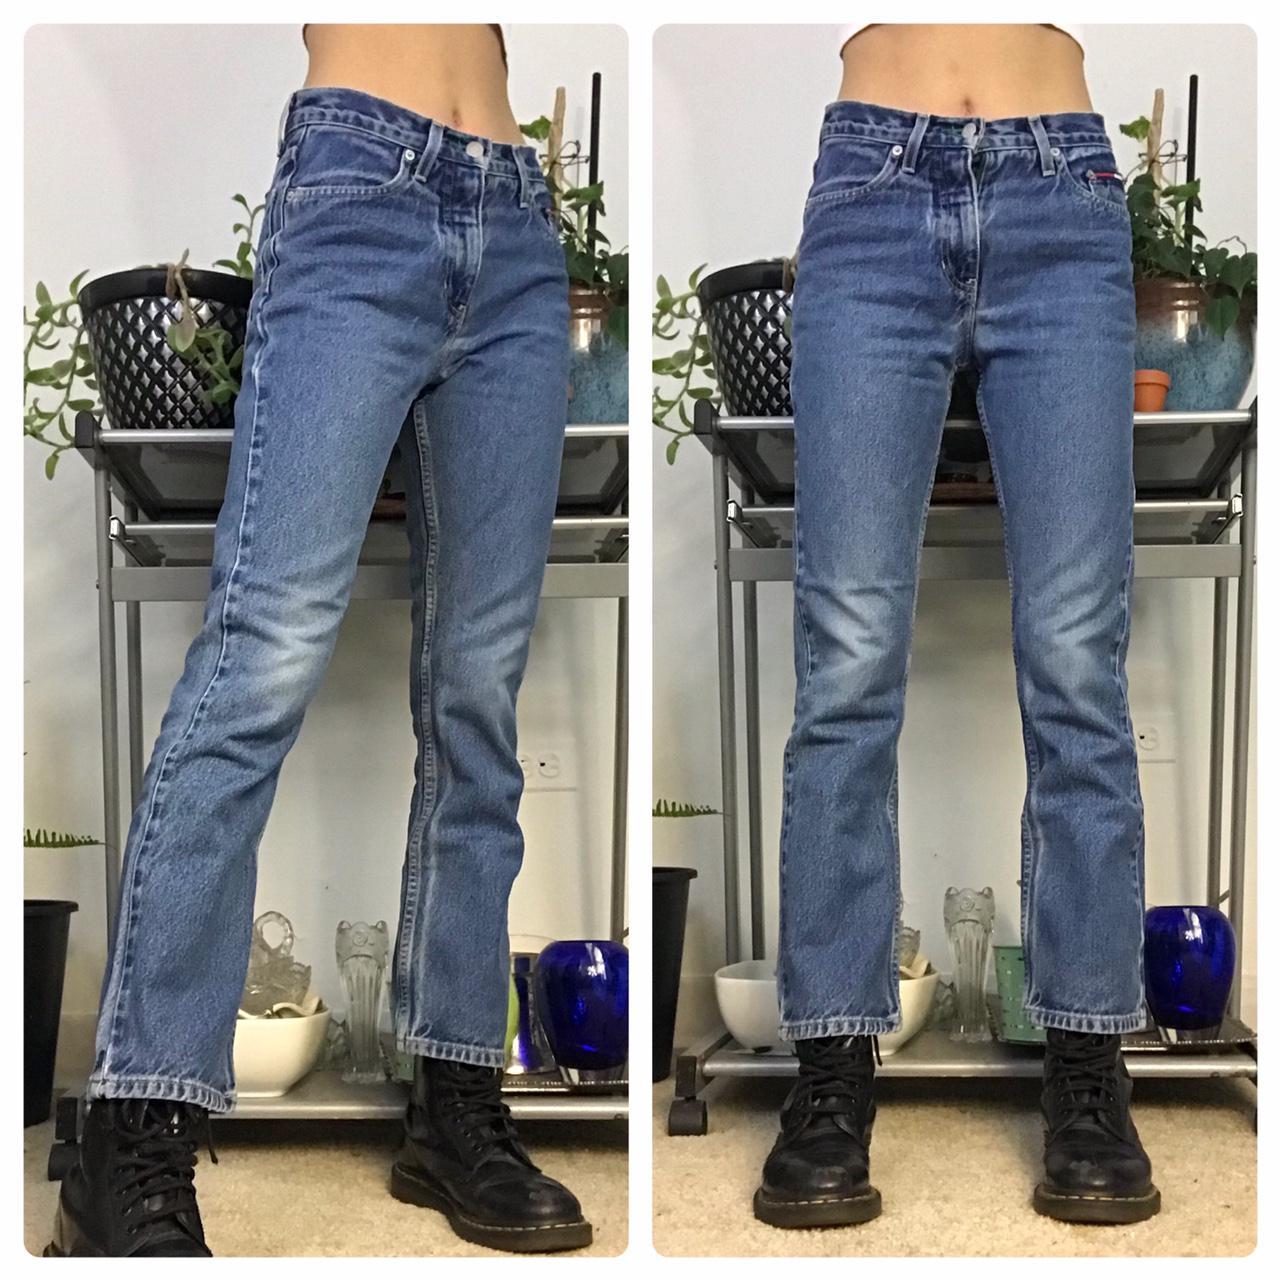 Product Image 2 - Vintage Straight Leg Jeans

Size 3/28
Brand